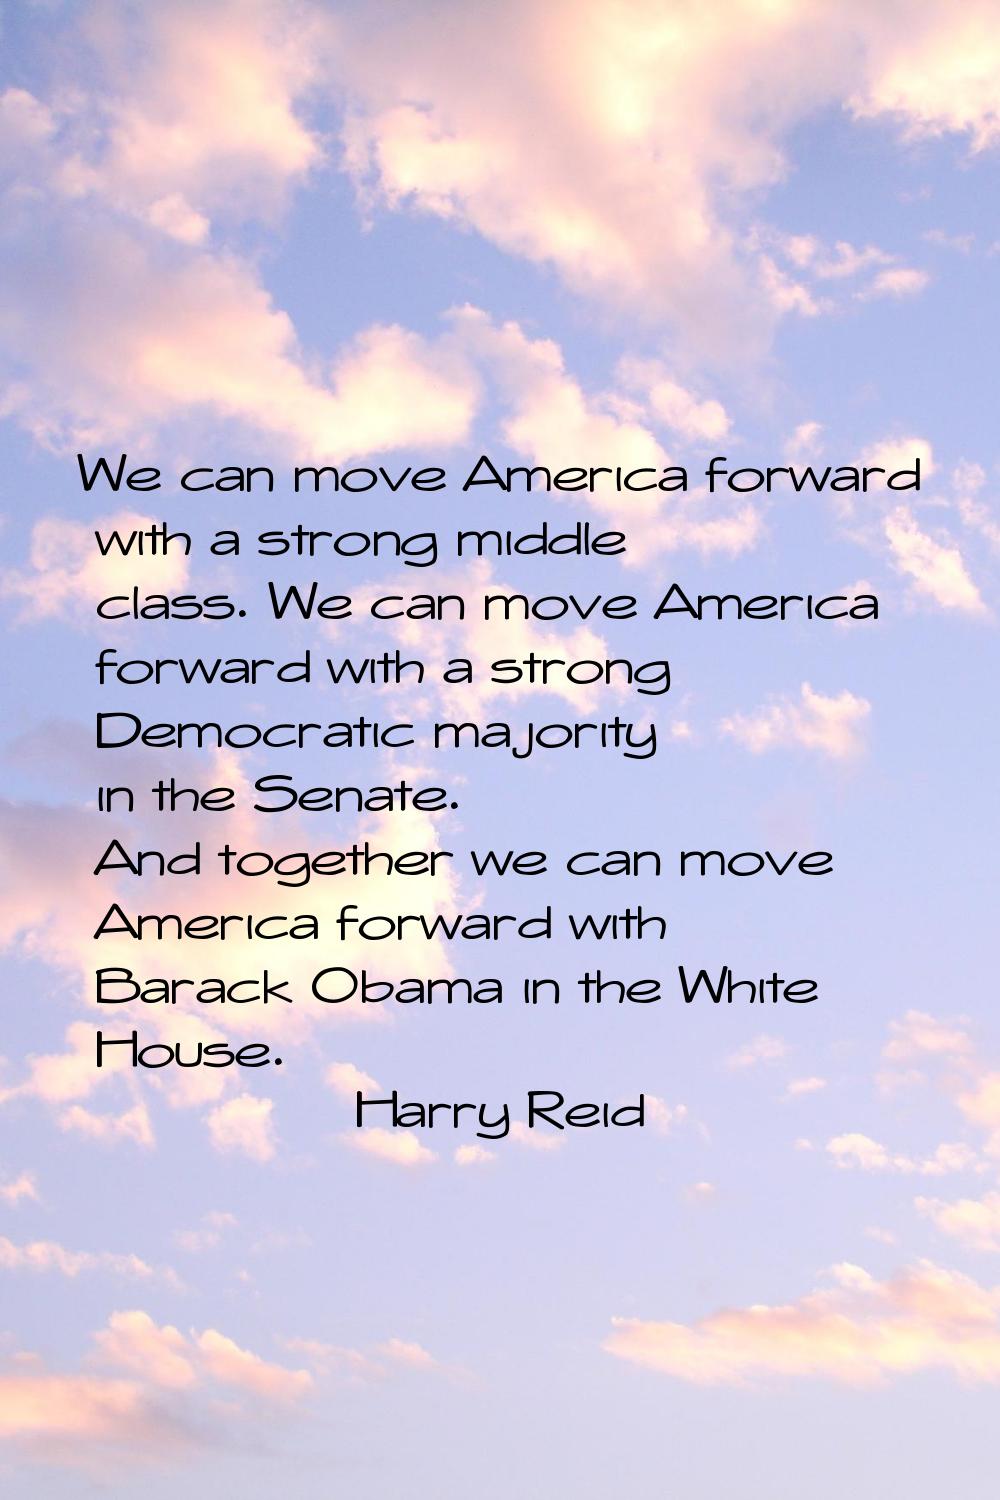 We can move America forward with a strong middle class. We can move America forward with a strong D